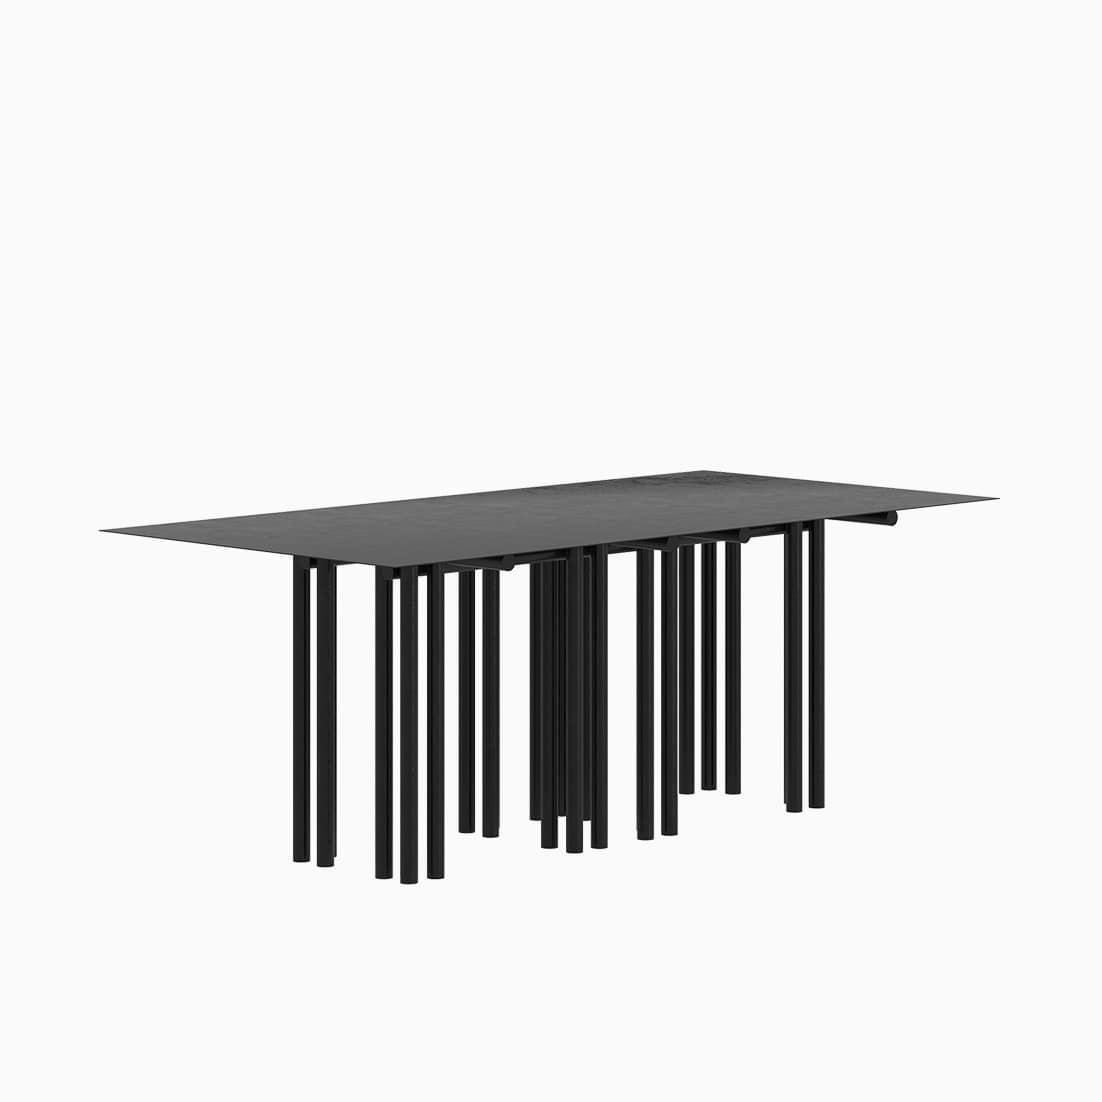 The Dolmen Dining Table is a monolithic piece conceptualized as a dining table suitable for both, indoor and outdoor. 
Crafted by hand in galvanized aluminum and coated with a matte electrostatic finish it's size can be customized.
The Dolmen Dining